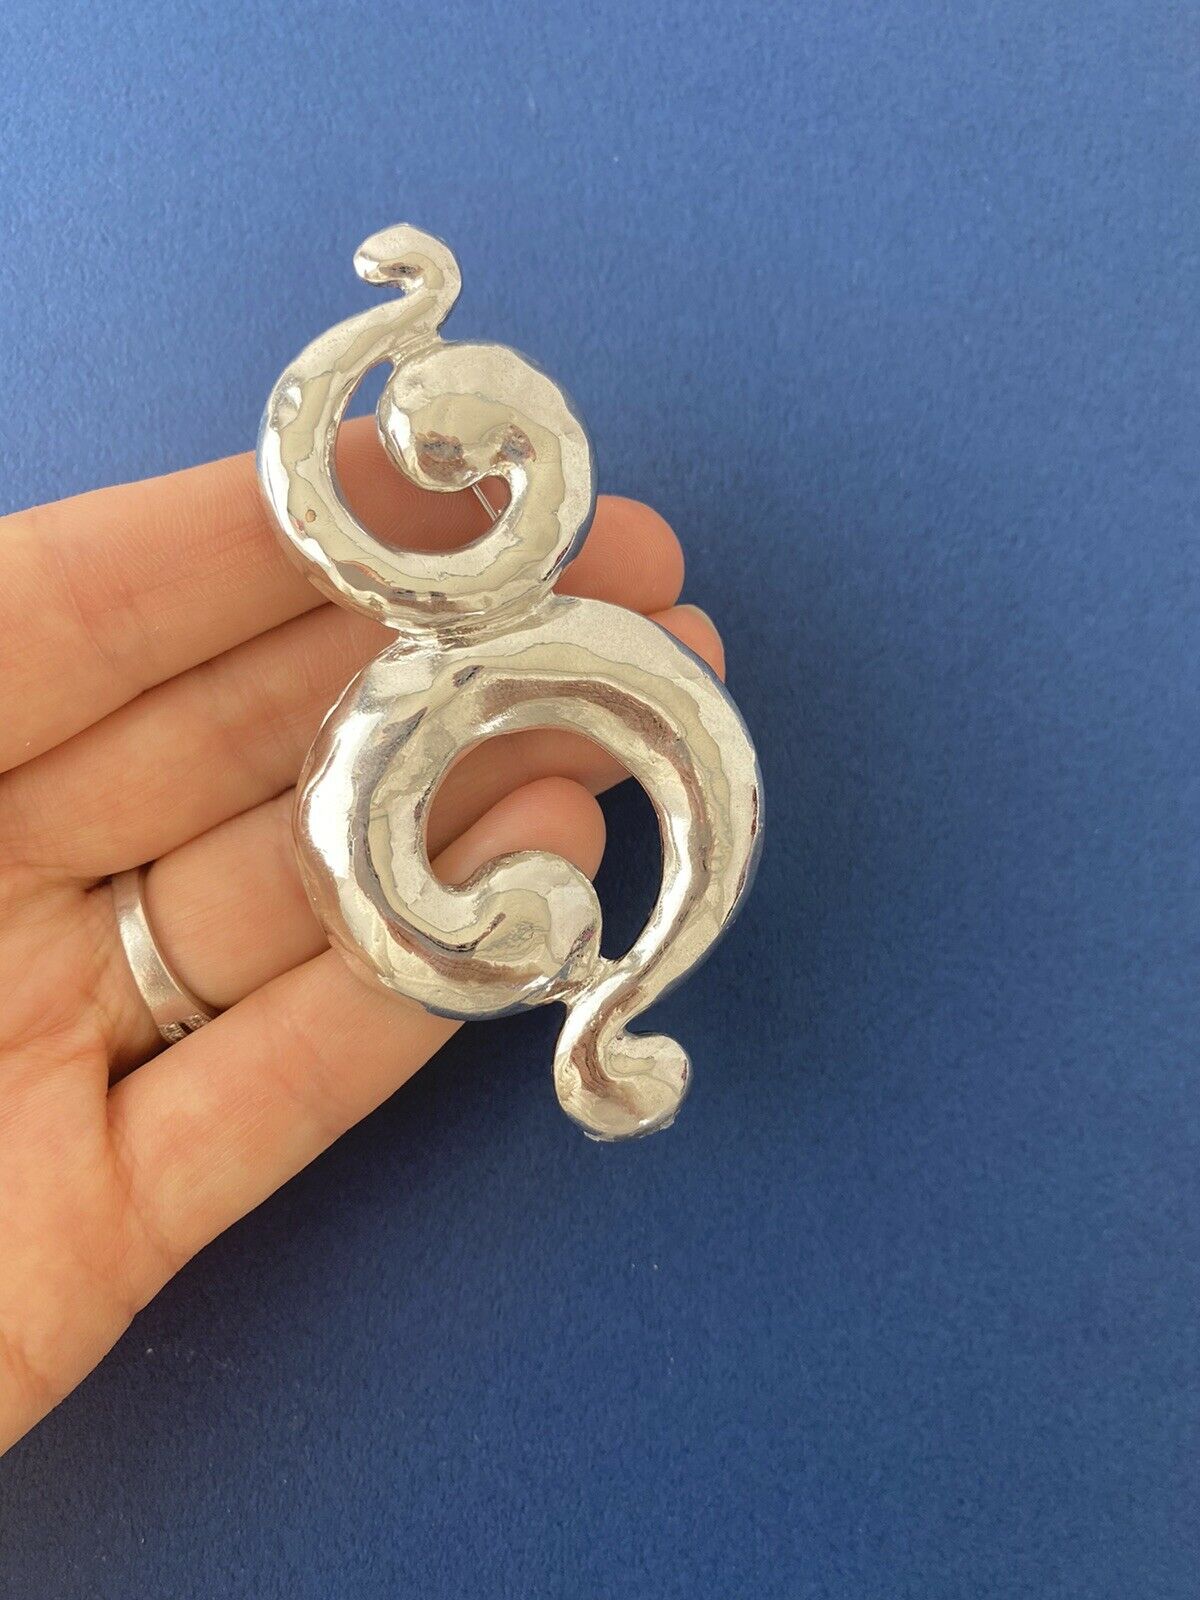 【SOLD OUT】YSL Yves Saint Laurent Vintage Massive Silver Tone Coil Spiral Brooch Pin